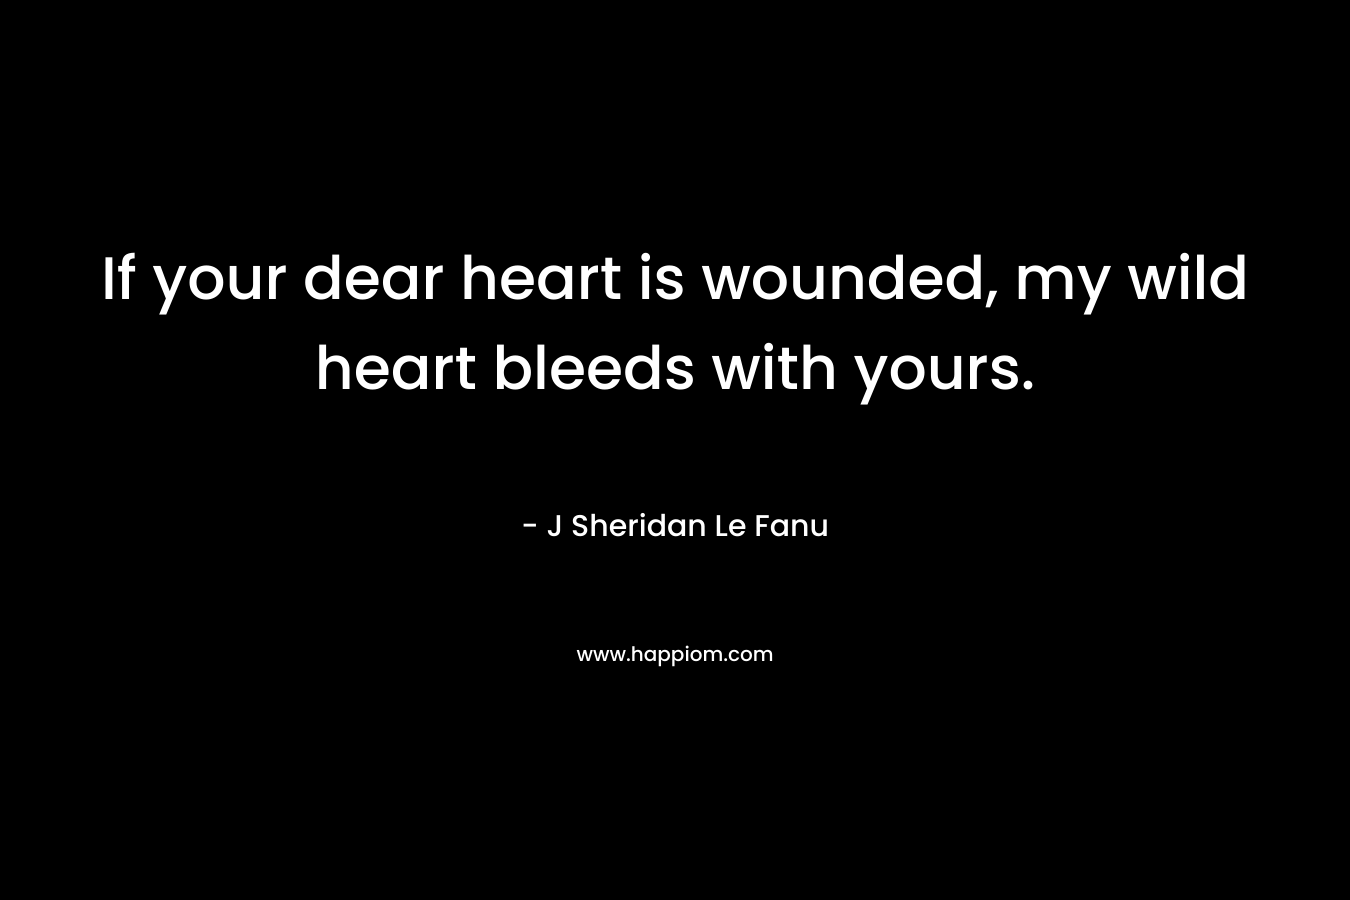 If your dear heart is wounded, my wild heart bleeds with yours. – J Sheridan Le Fanu